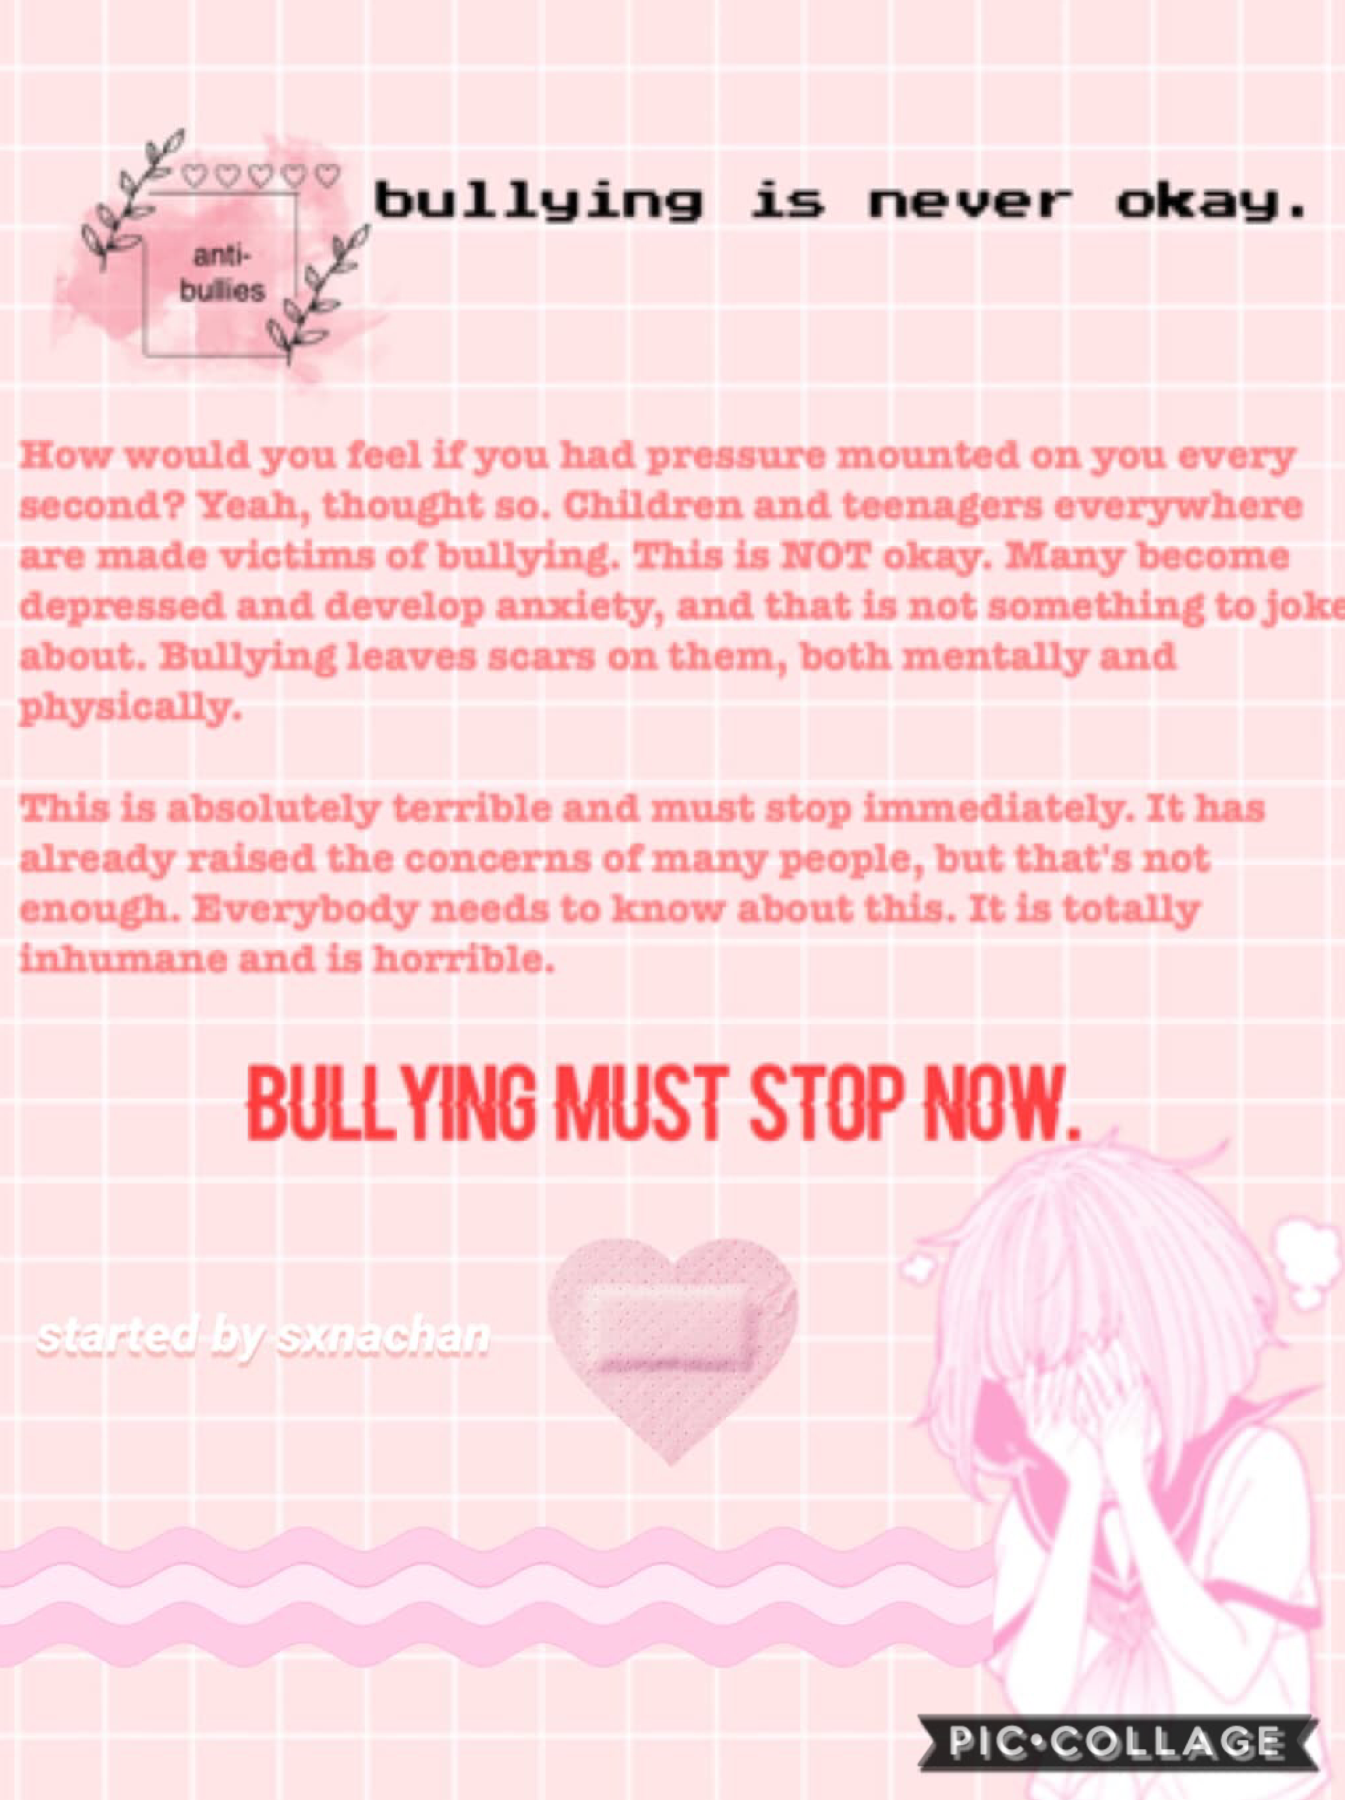 tap~

bullying is never okay and it’s never right :( please spread this around! 

💖 ~ started by sxnachan ~ 💖

love from sophie ✨☁️

